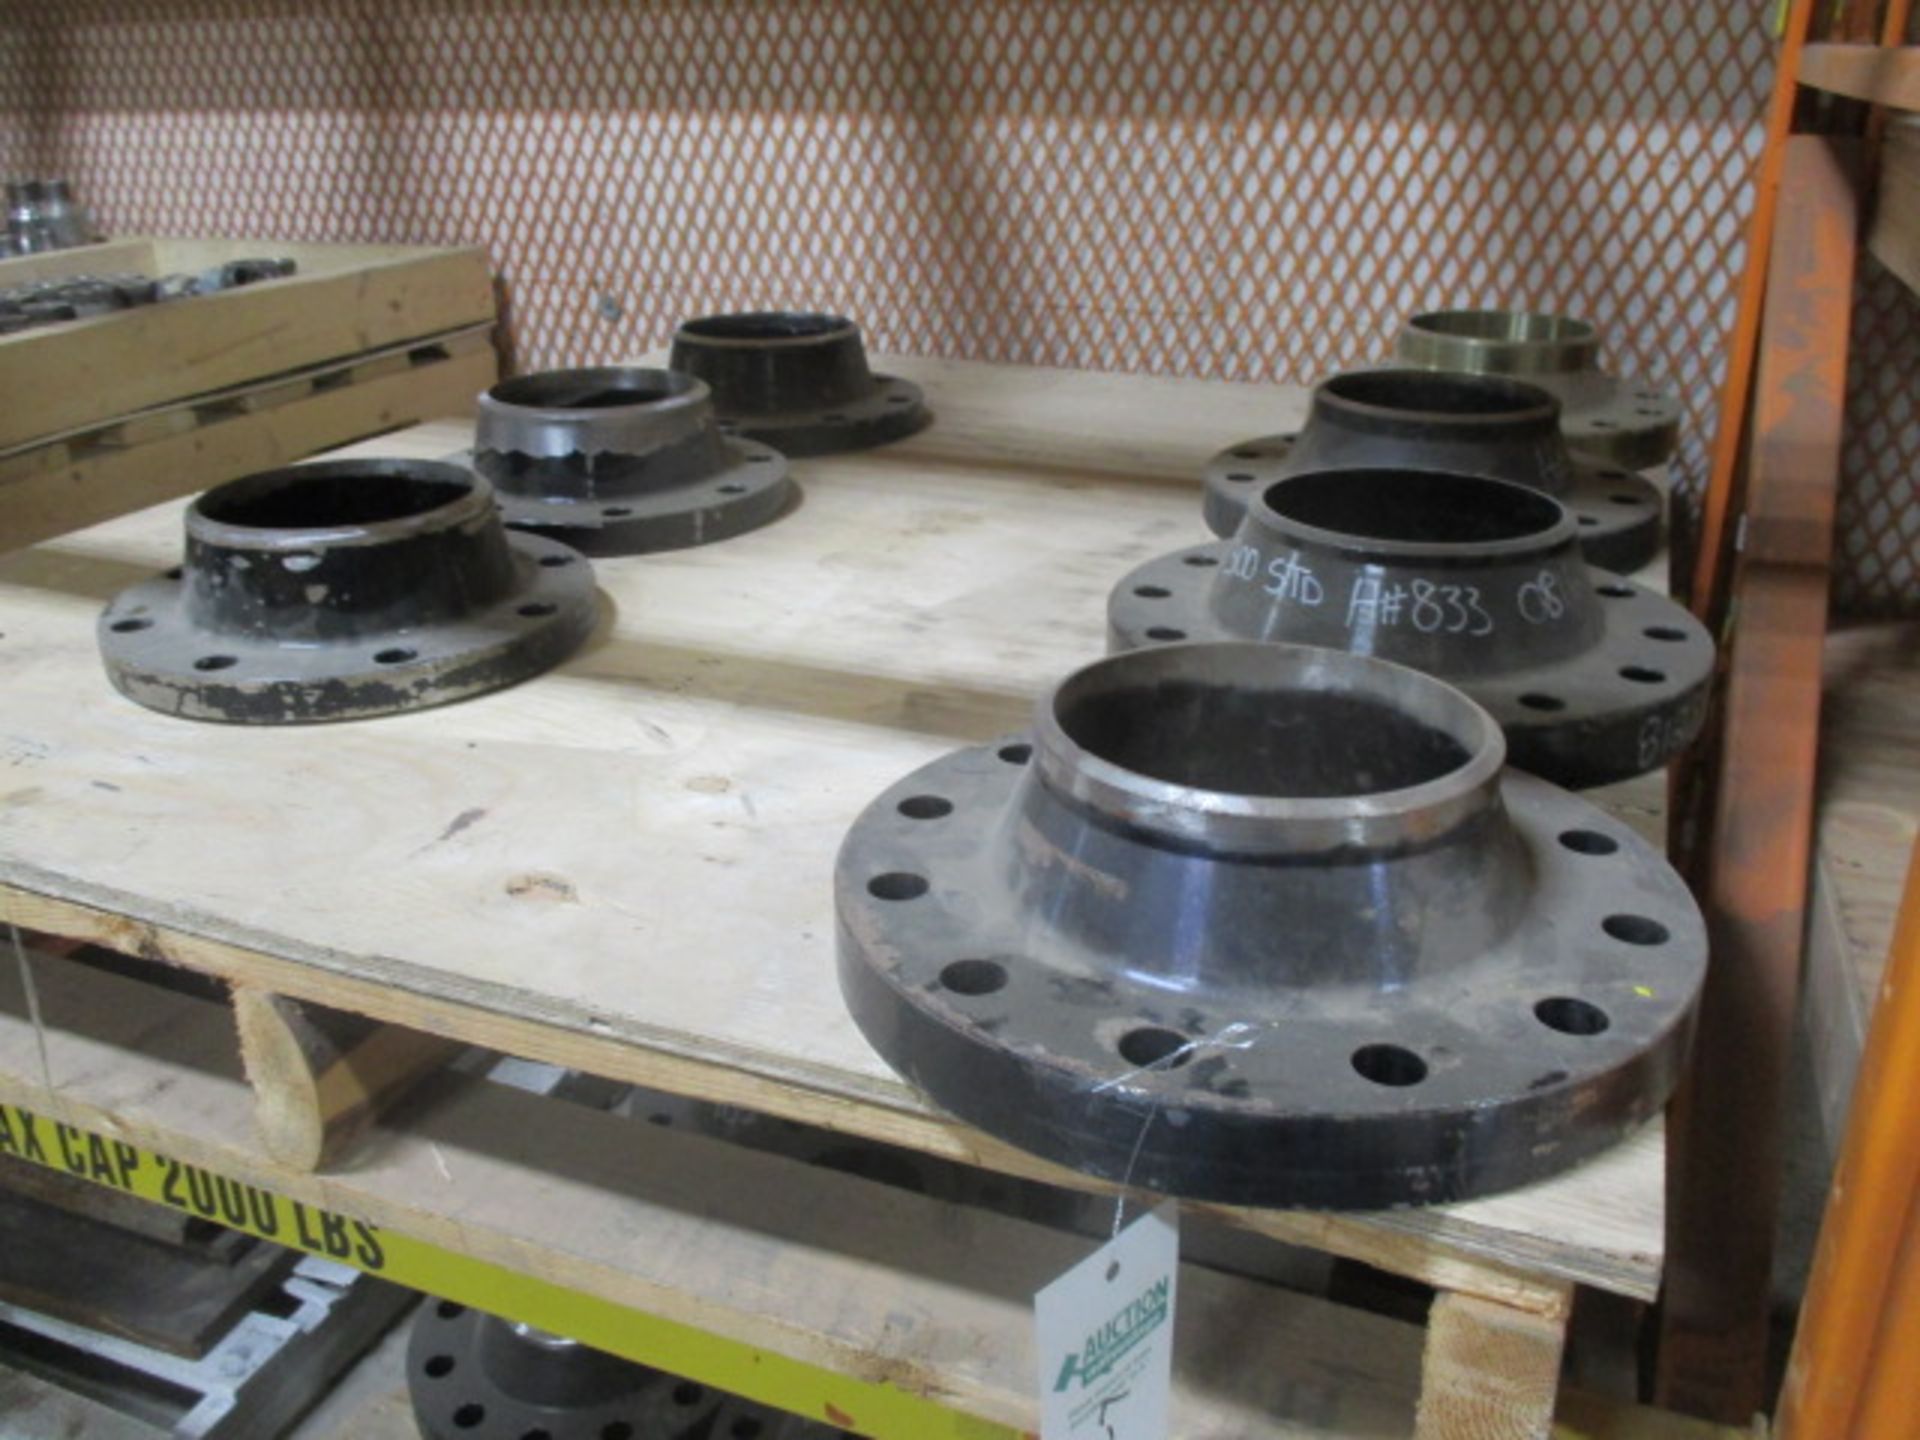 Lot of 7 - 6" X 10" and 6" X 12" flanges